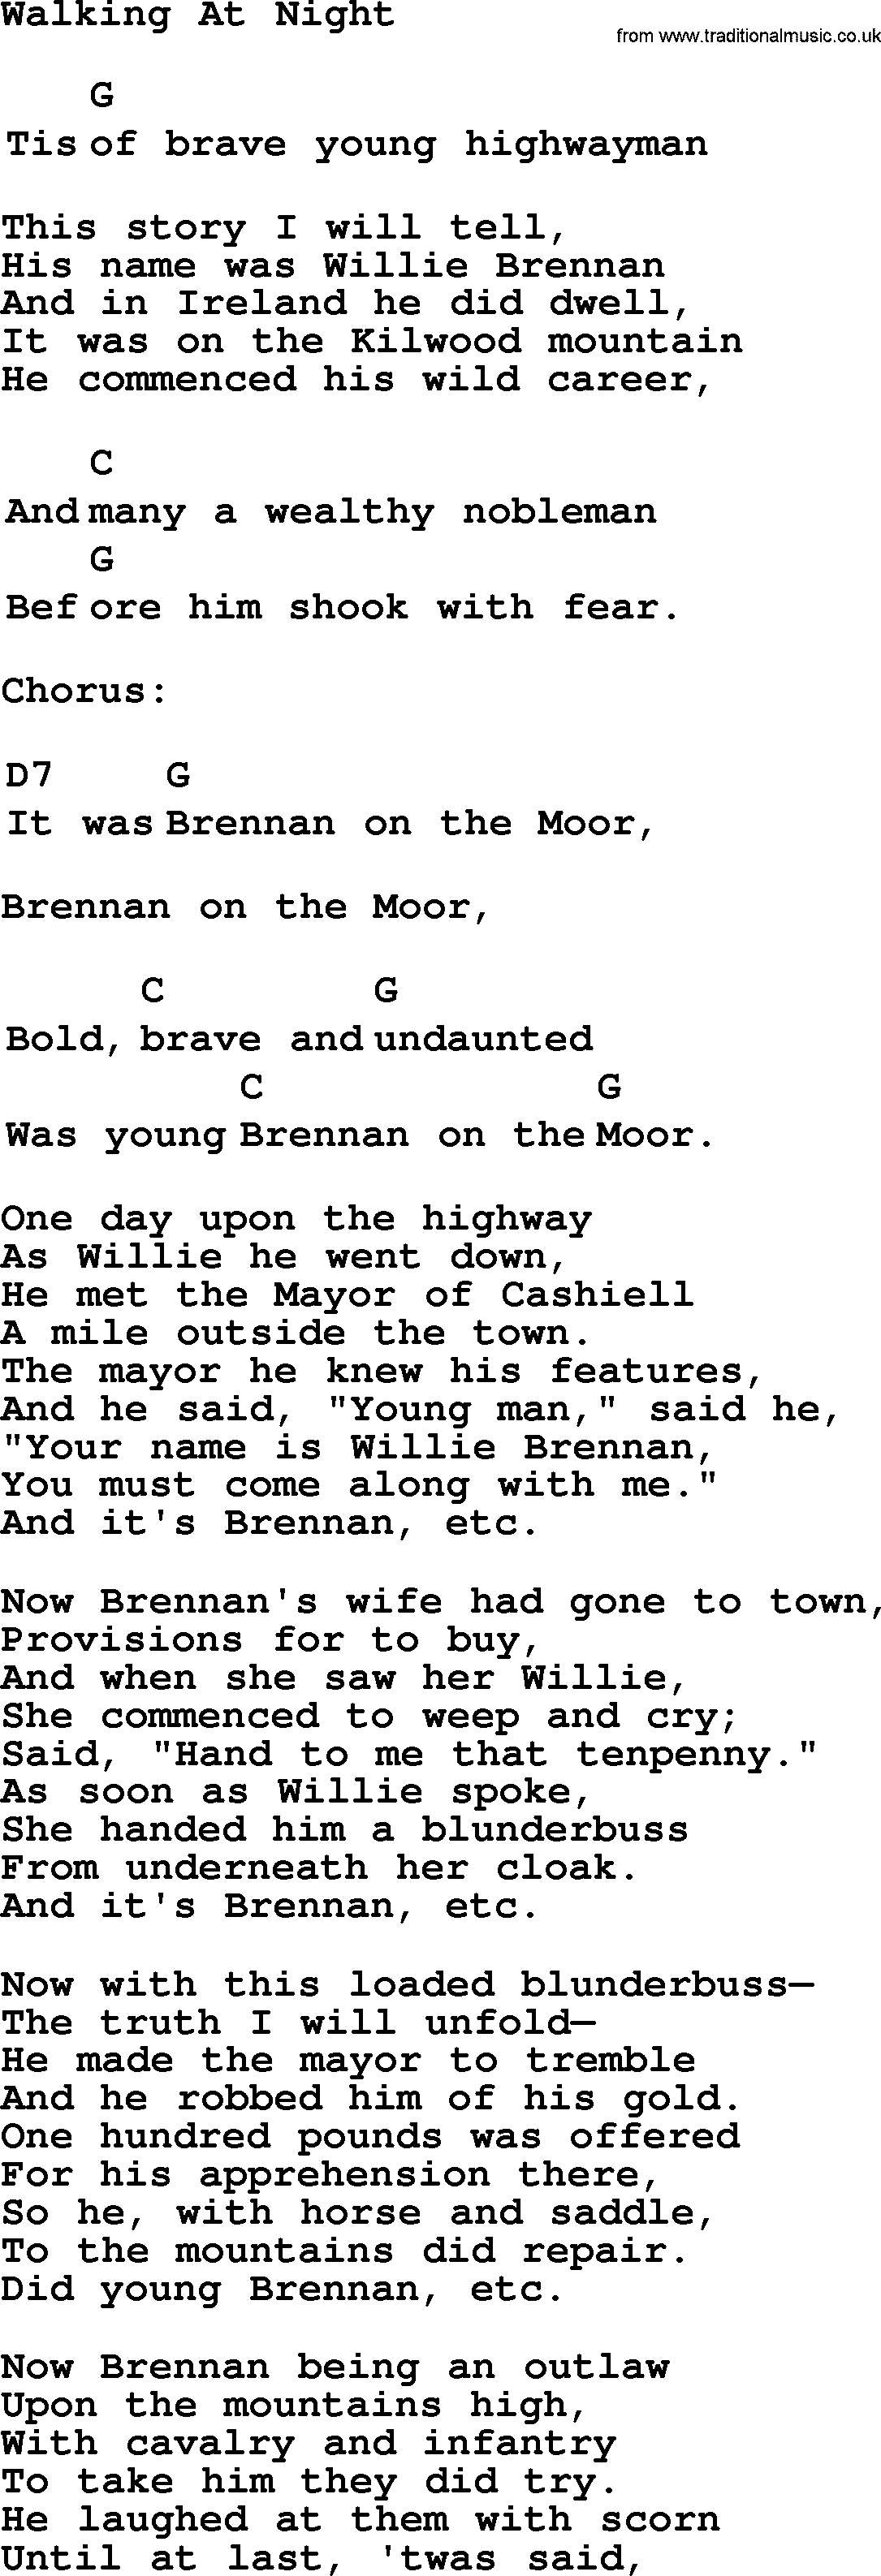 Top 1000 Most Popular Folk and Old-time Songs: Brennan On The Moor, lyrics and chords